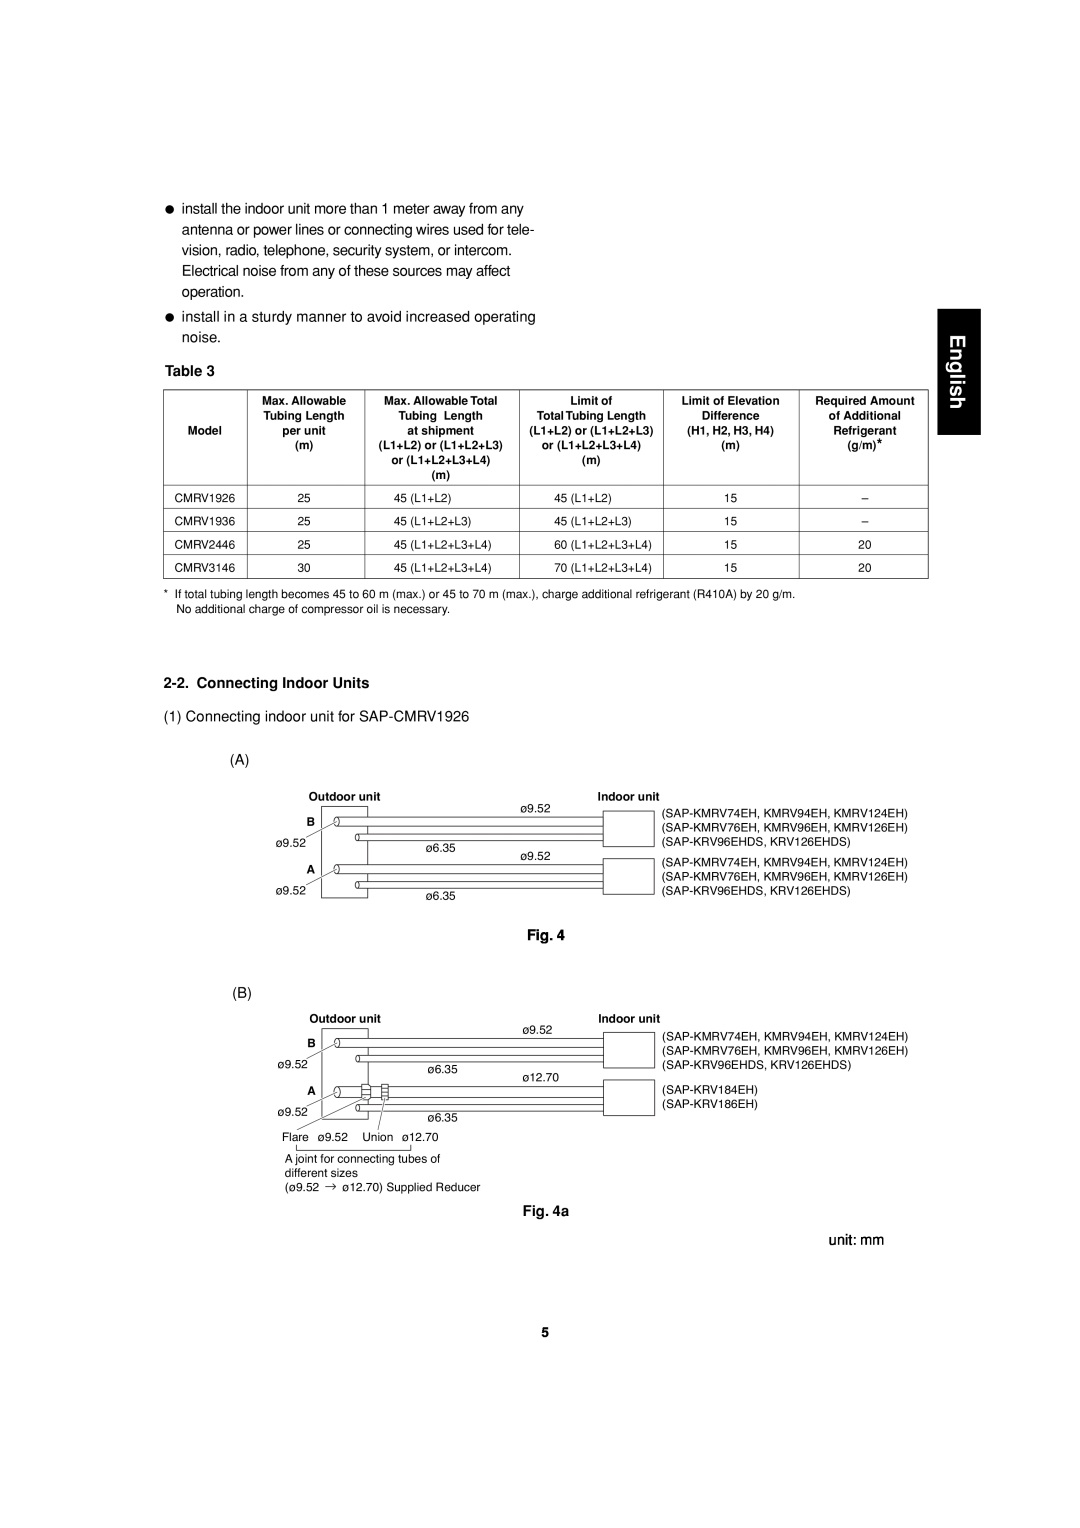 Sanyo SAP-CMRV1926EH, SAP-CMRV1426EH-F service manual English, Table, Connecting Indoor Units, Fig 